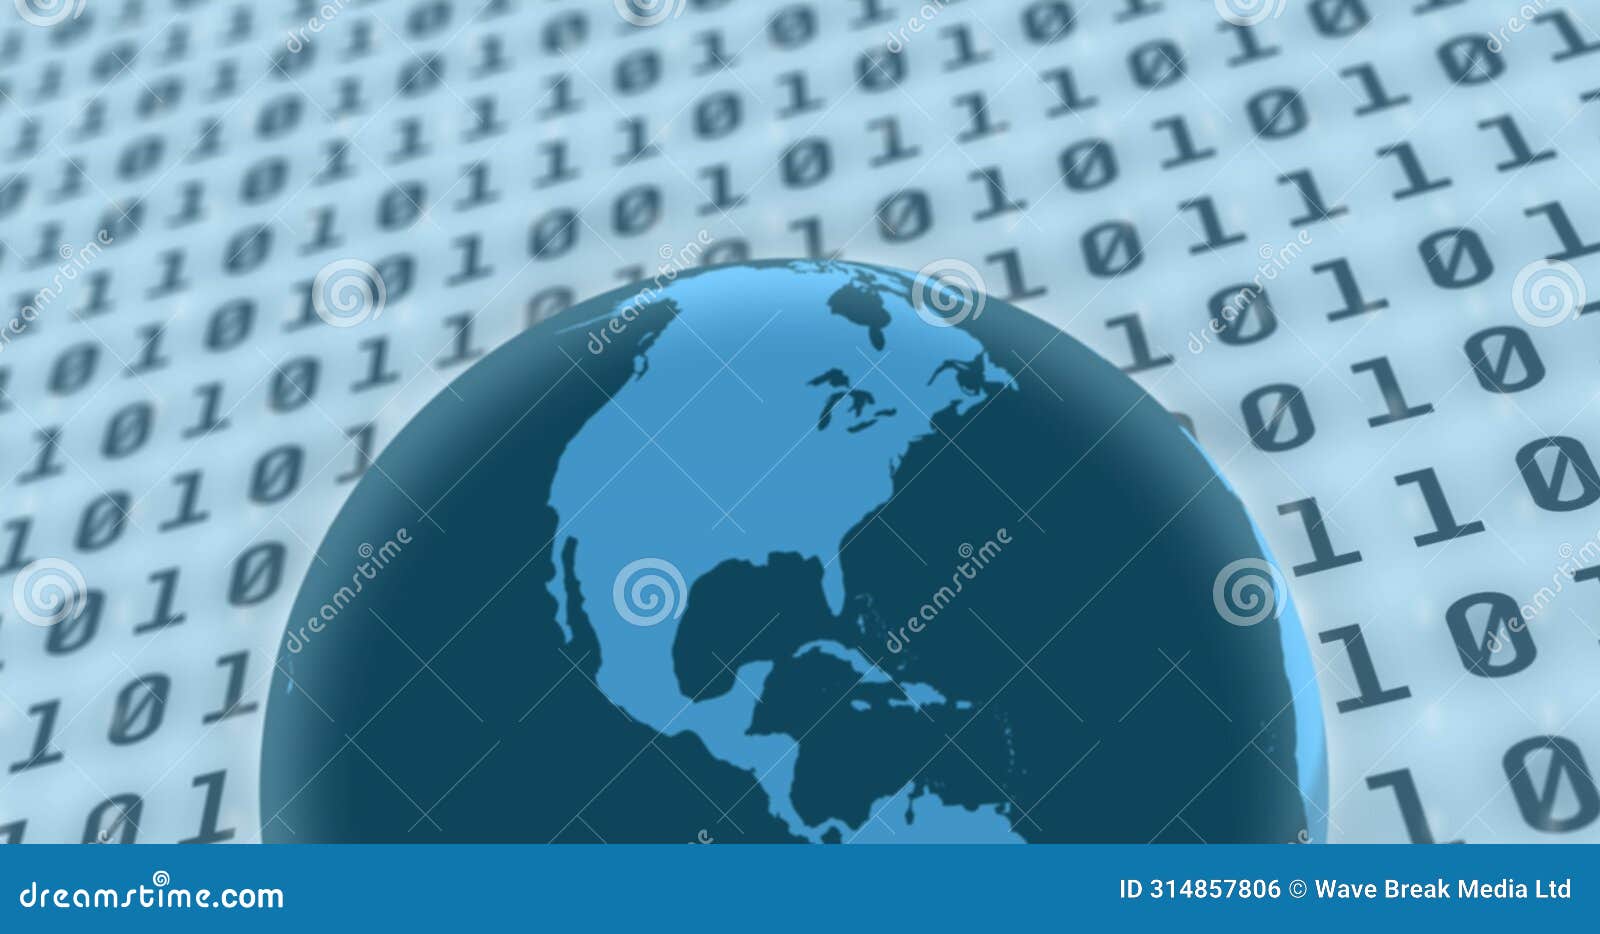 image of globe with computer and envelope icons over binary coding